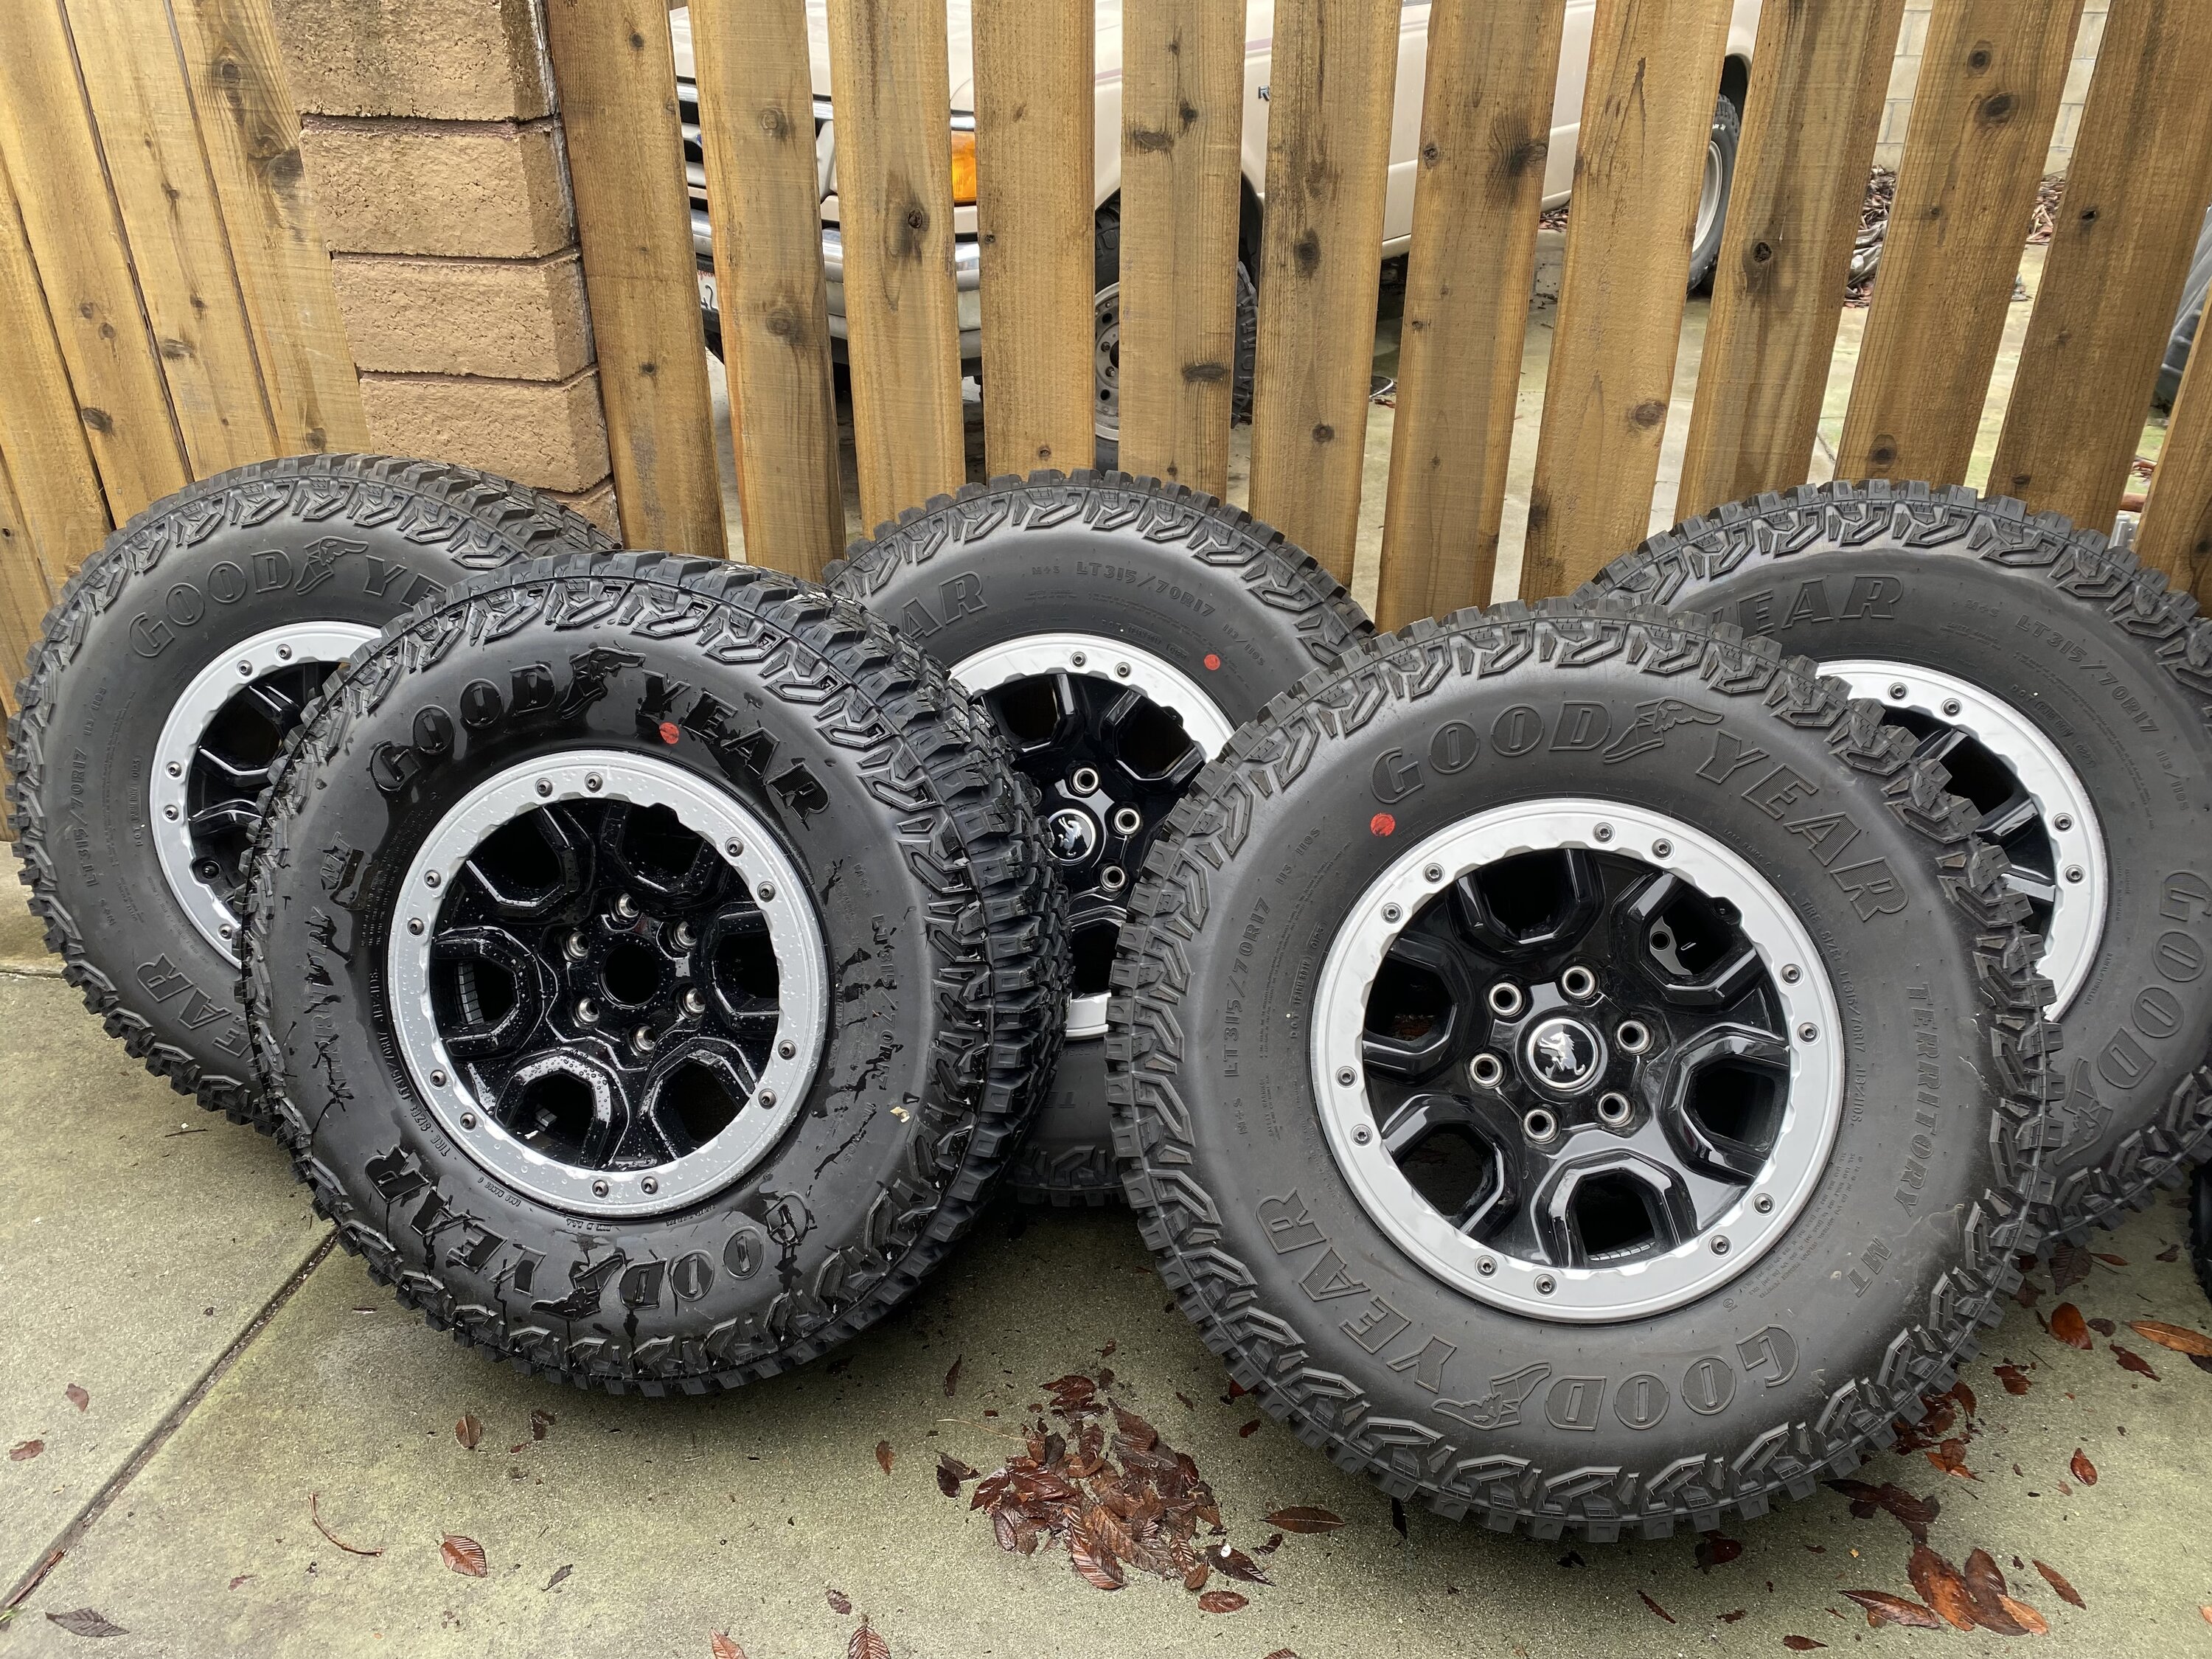 Ford Bronco Sasquatch Wheel & Tire Set of 5 (New Take Offs) - Local Pickup Only Long Beach, CA IMG_9835